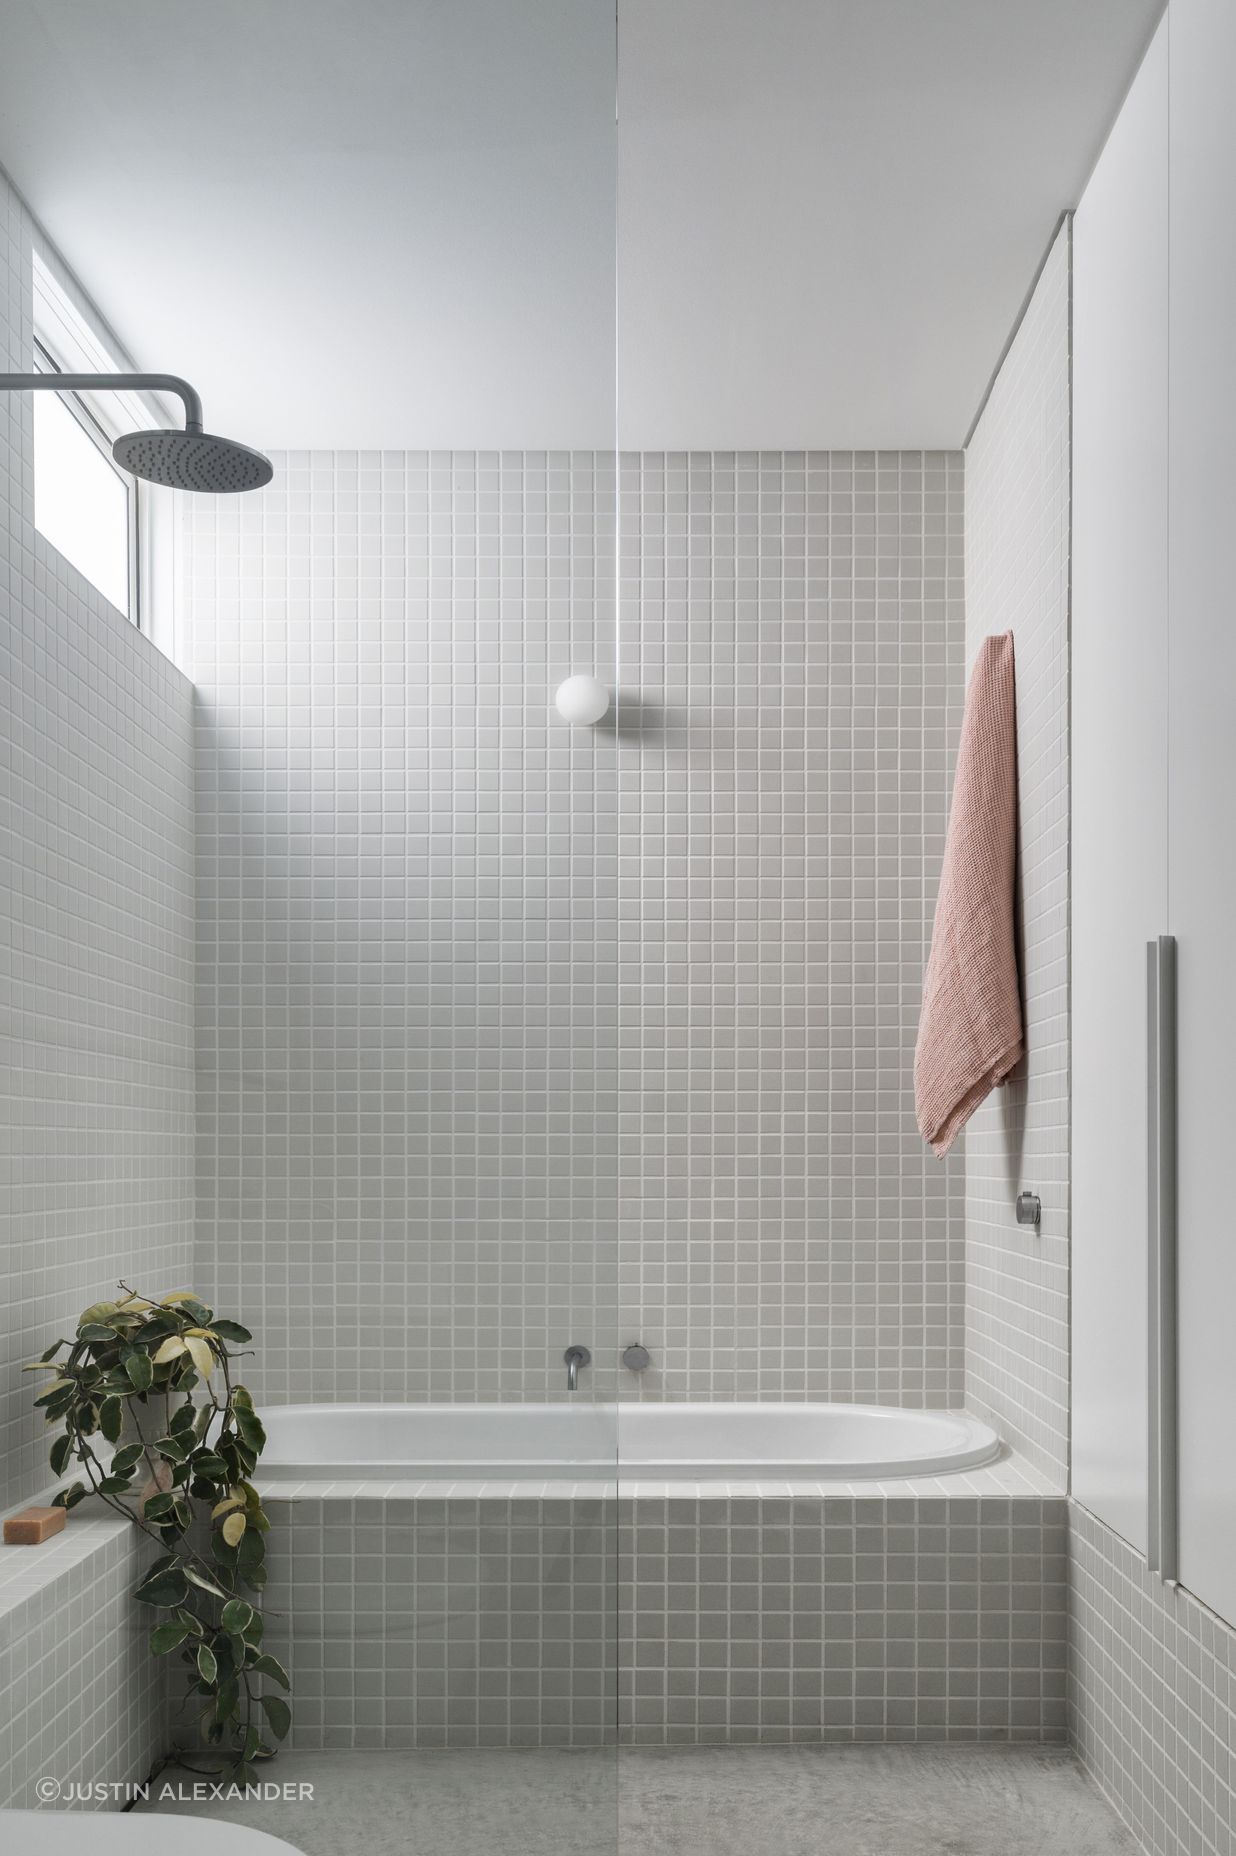 Muted tones within the bathroom.